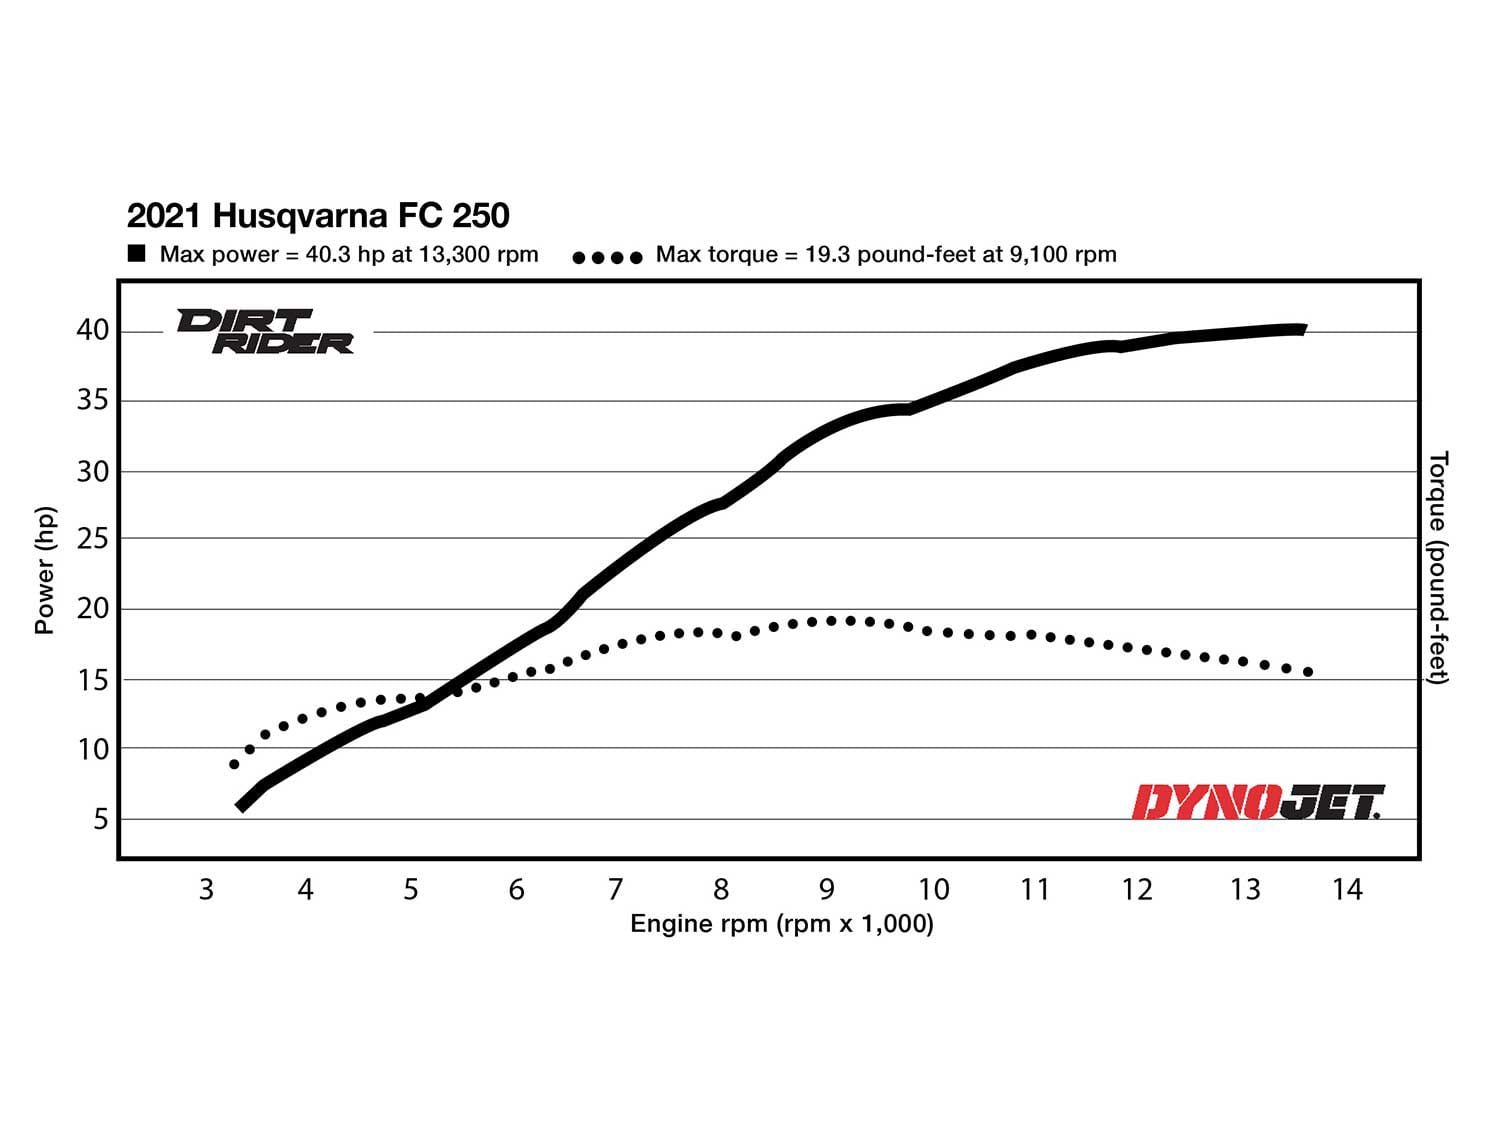 The FC 250 is competitive on the dyno; 40.3 hp at 13,300 rpm puts it in the runner-up spot in peak horsepower and 19.3 pound-feet of torque at 9,100 rpm is the highest peak figure in the class.